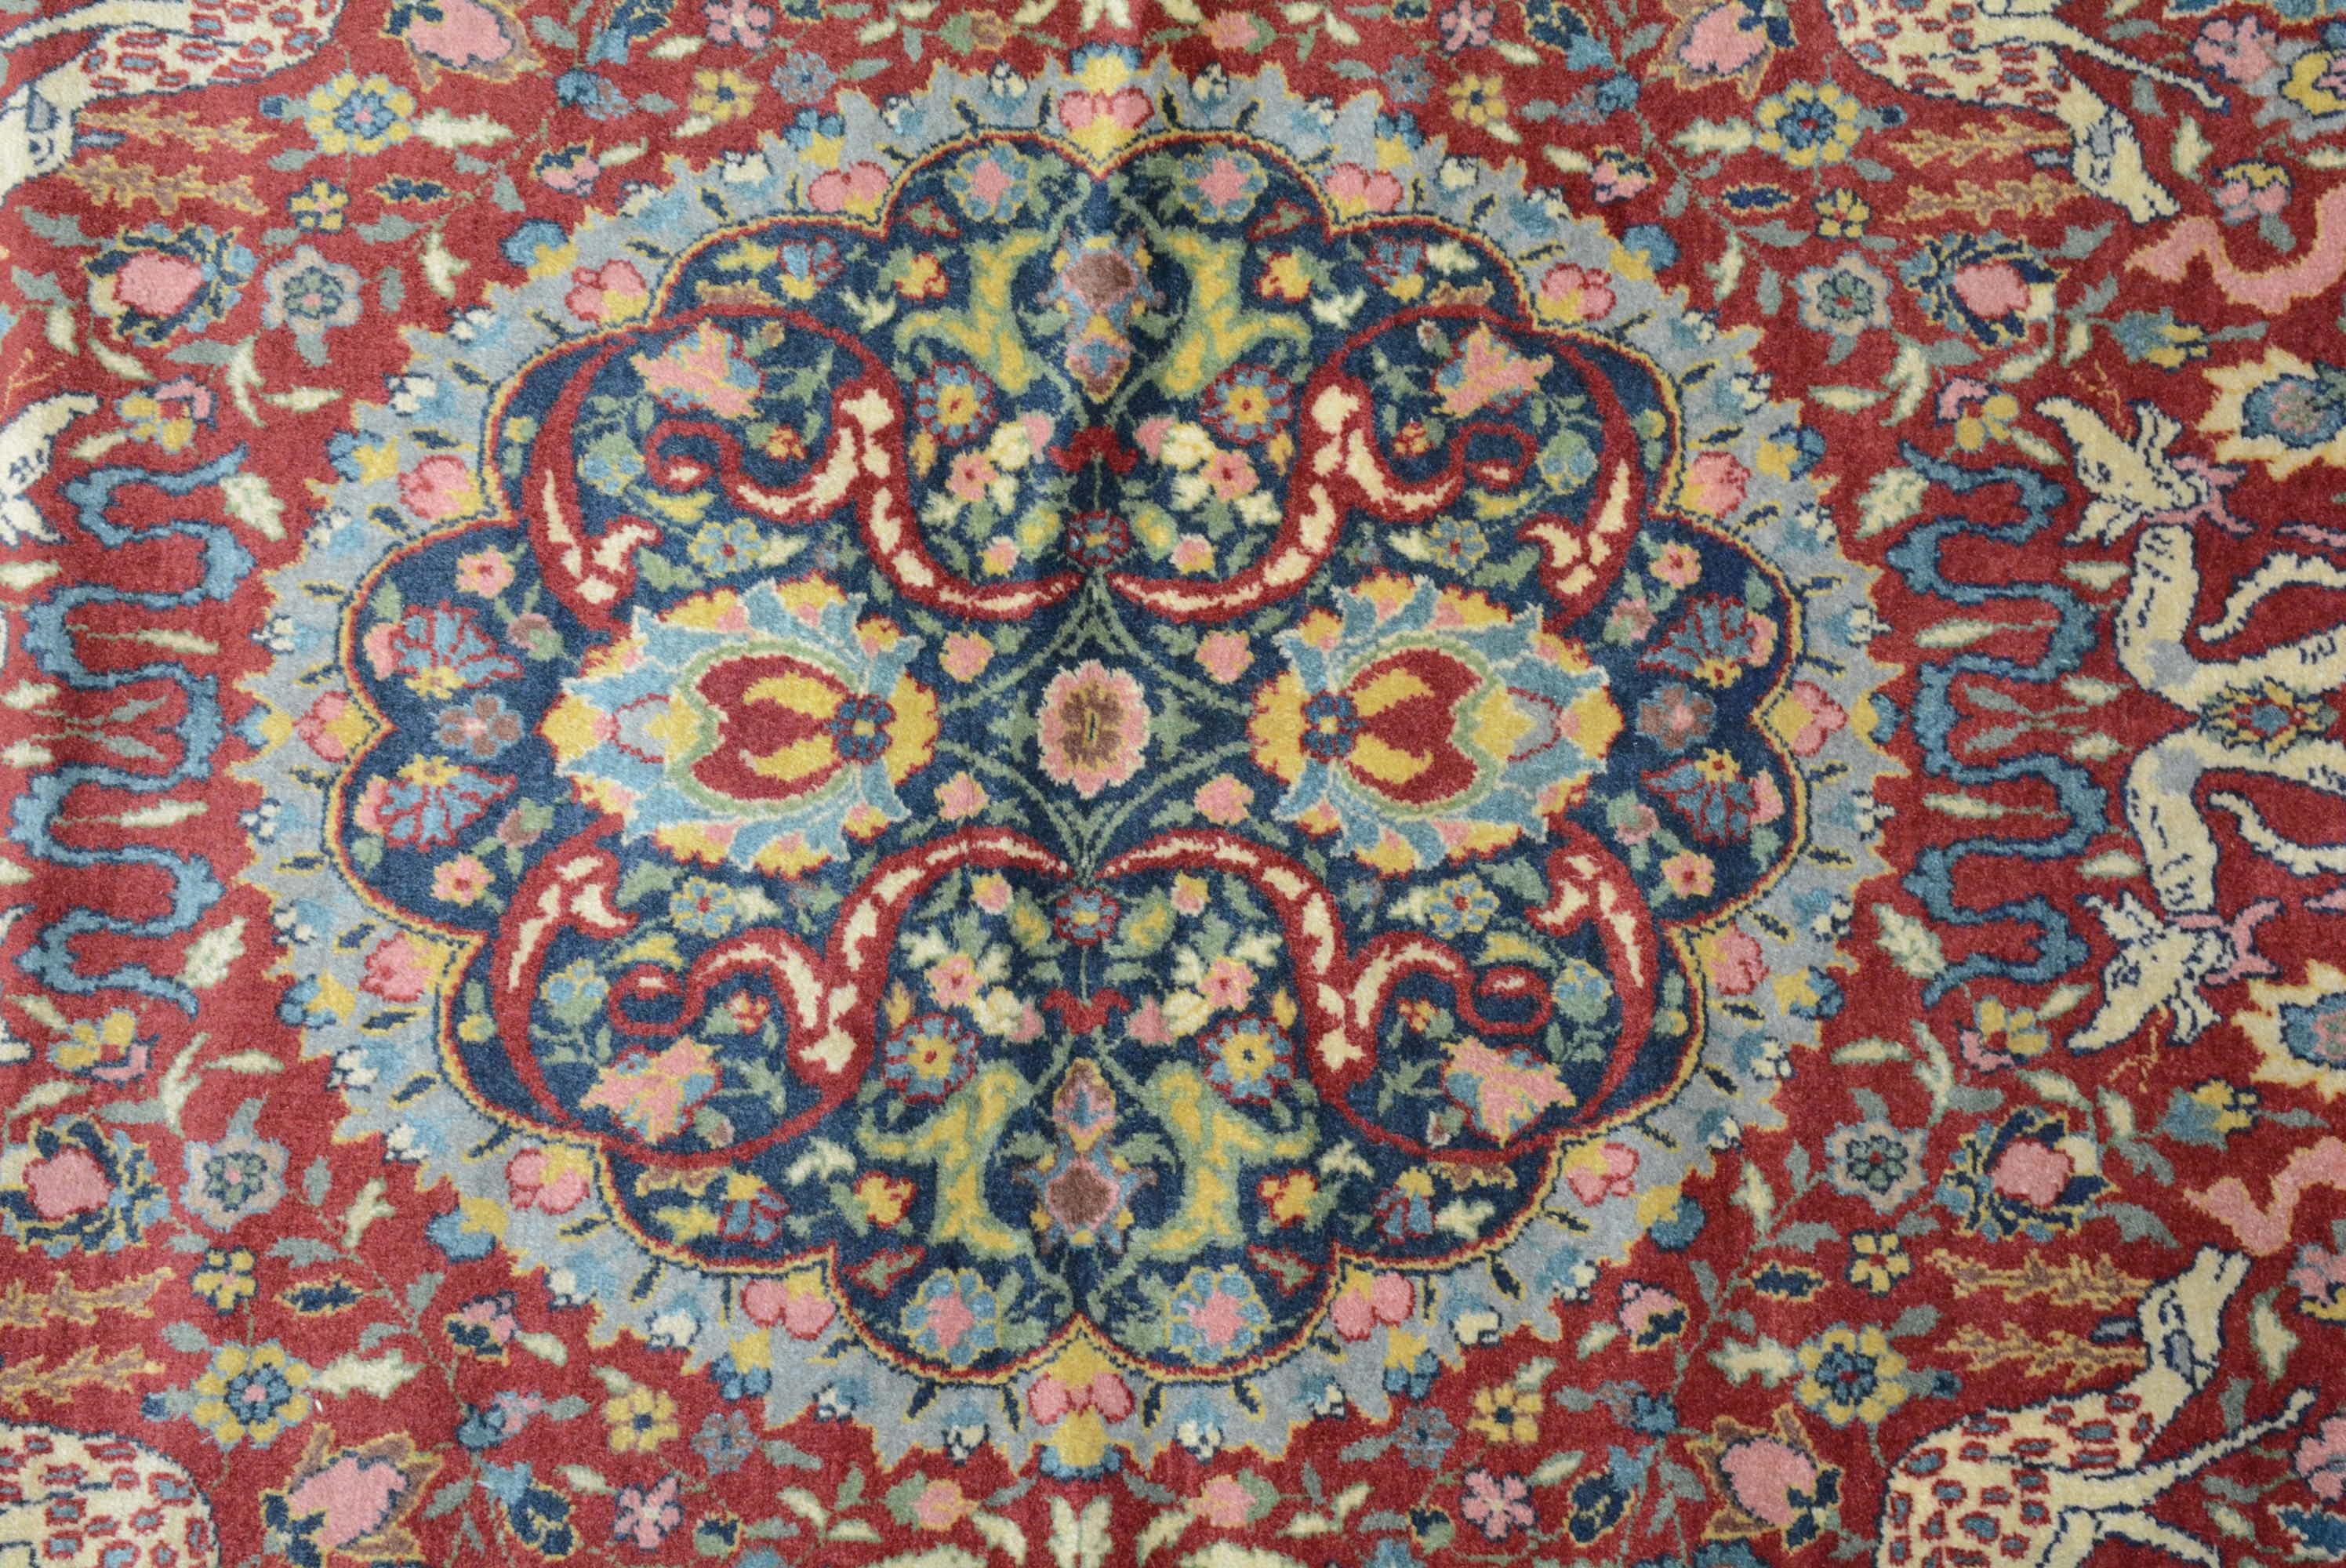 The carpet manufactory in Hereke, a city in western Turkey, was founded by the Ottoman Sultan Abdulmecid I in 1841 to produce all of the textiles for his palaces.  He gathered the best weavers and artists of the Ottoman Empire to produce